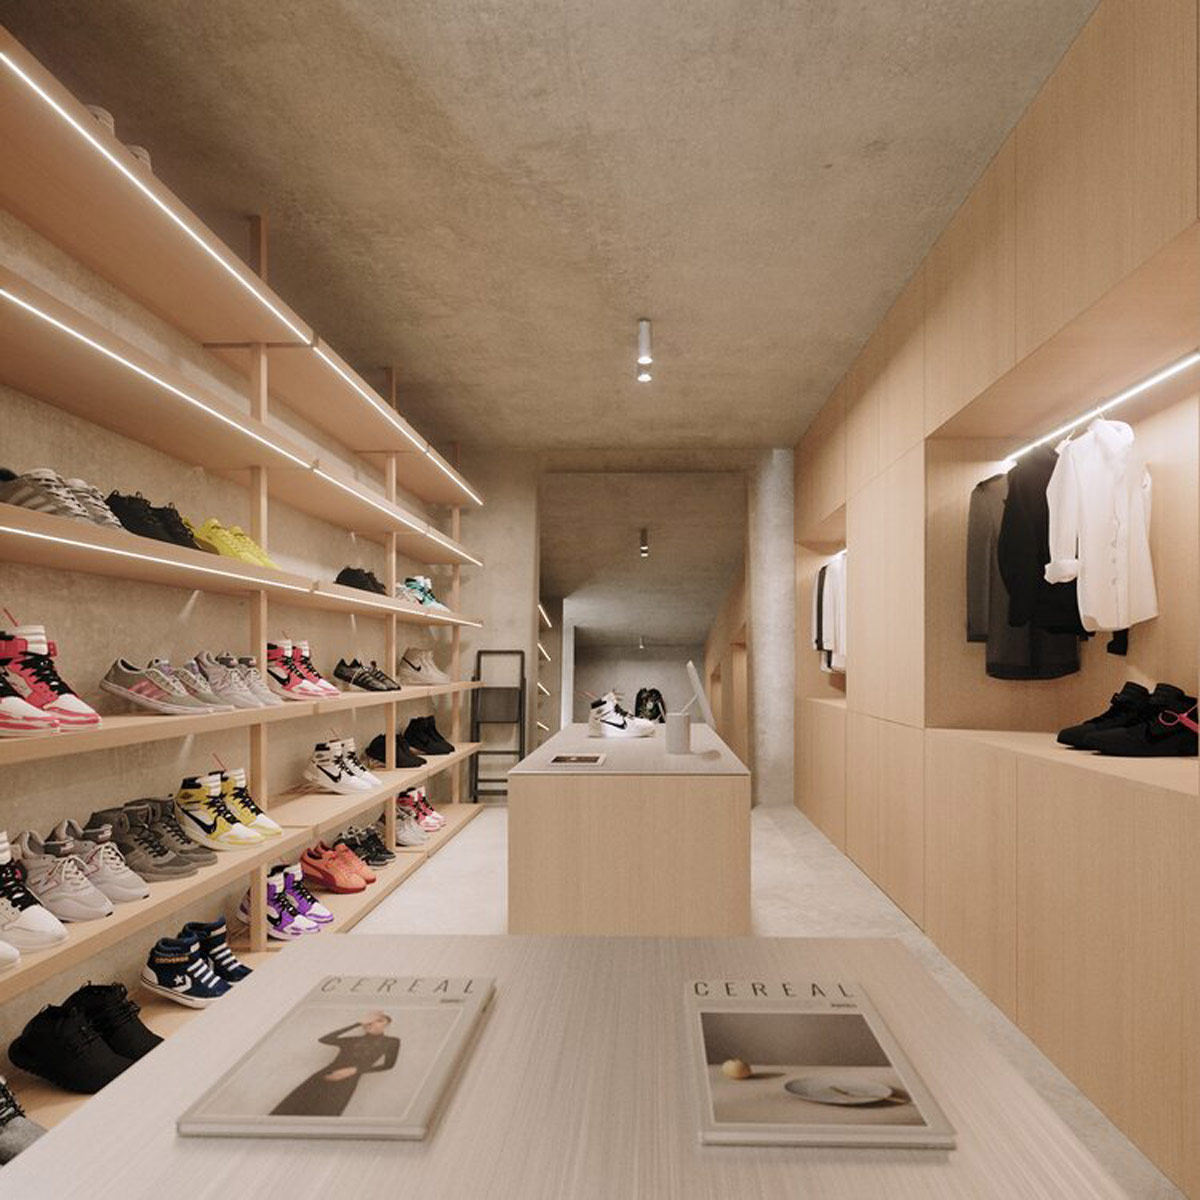 Is it a shoe store, or is it a walk-in wardrobe? No need to decide; bask in the glory of this enviable kicks collection.